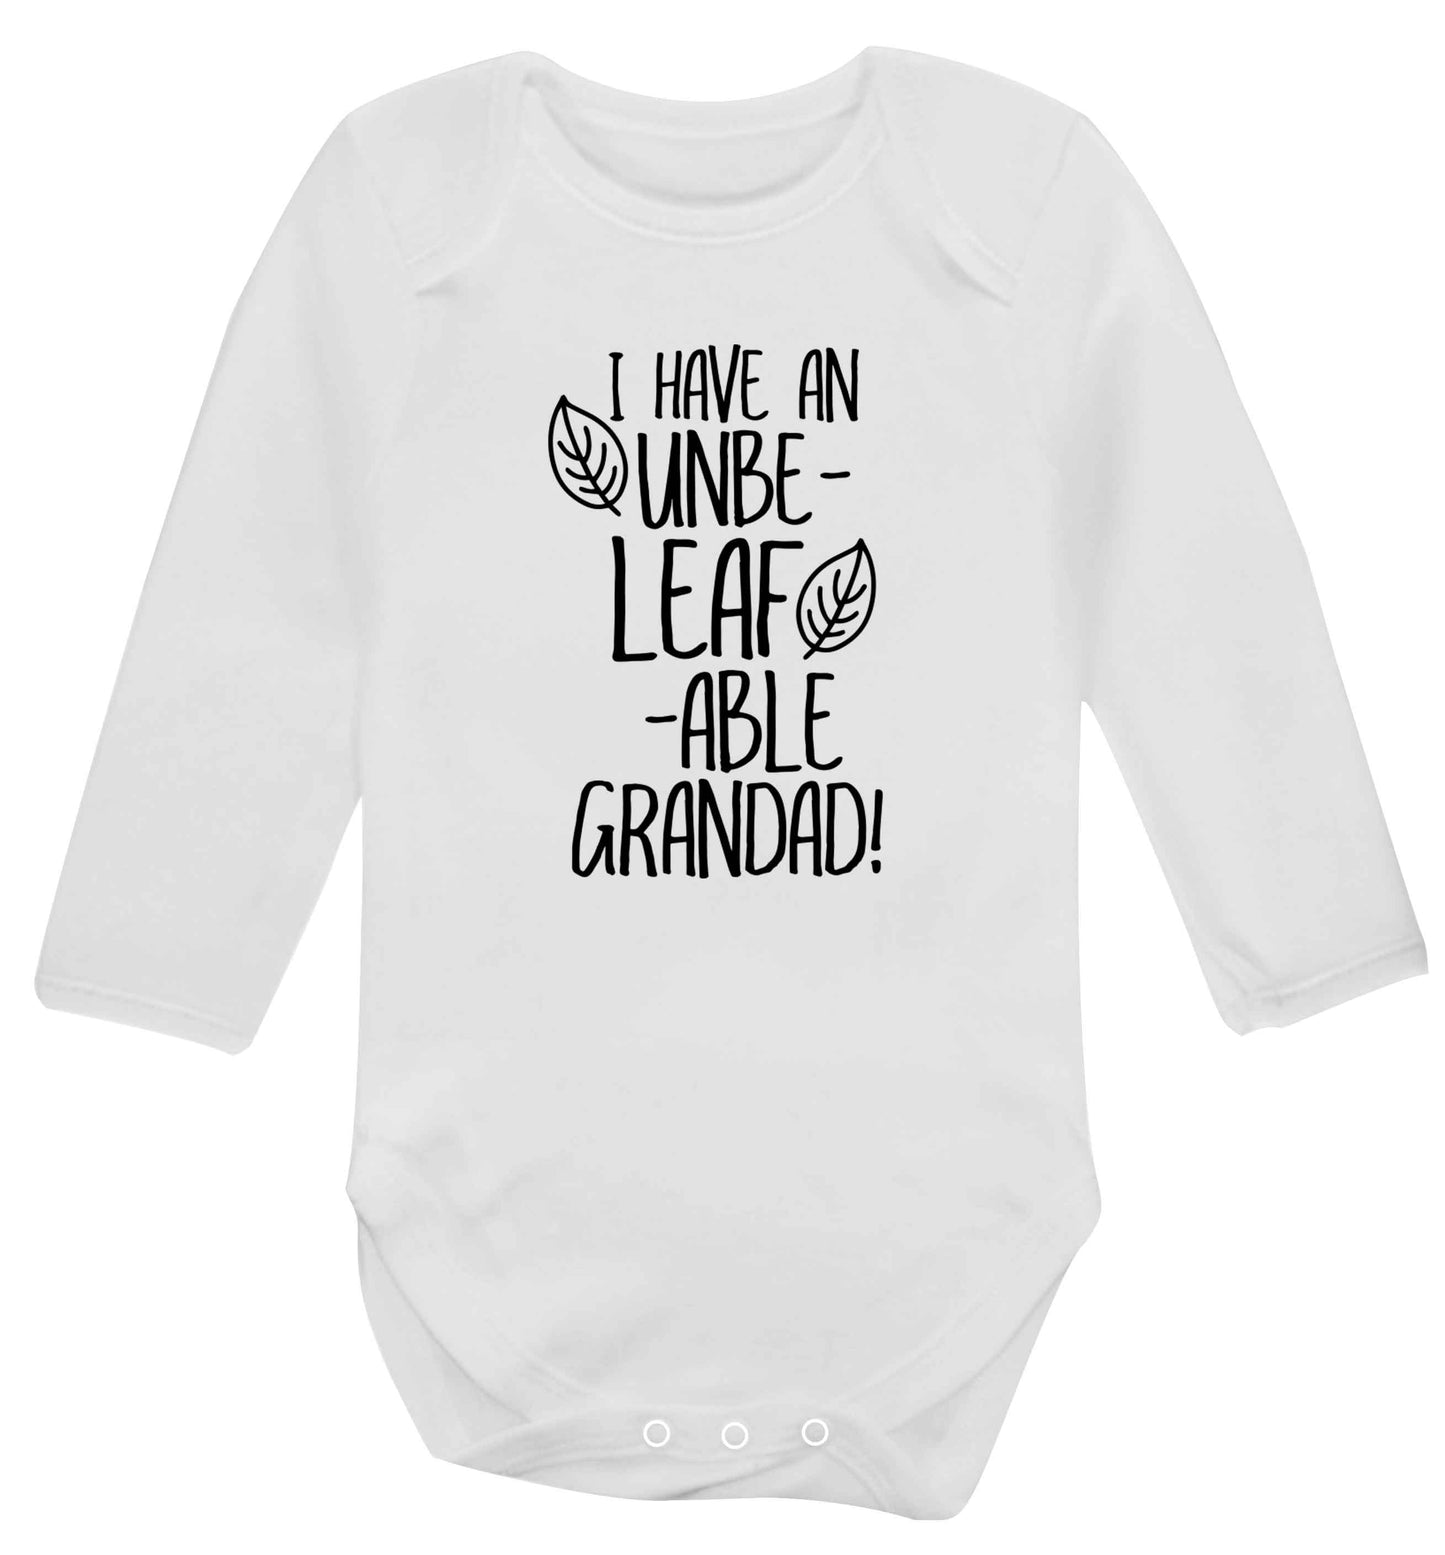 I have an unbe-leaf-able grandad Baby Vest long sleeved white 6-12 months